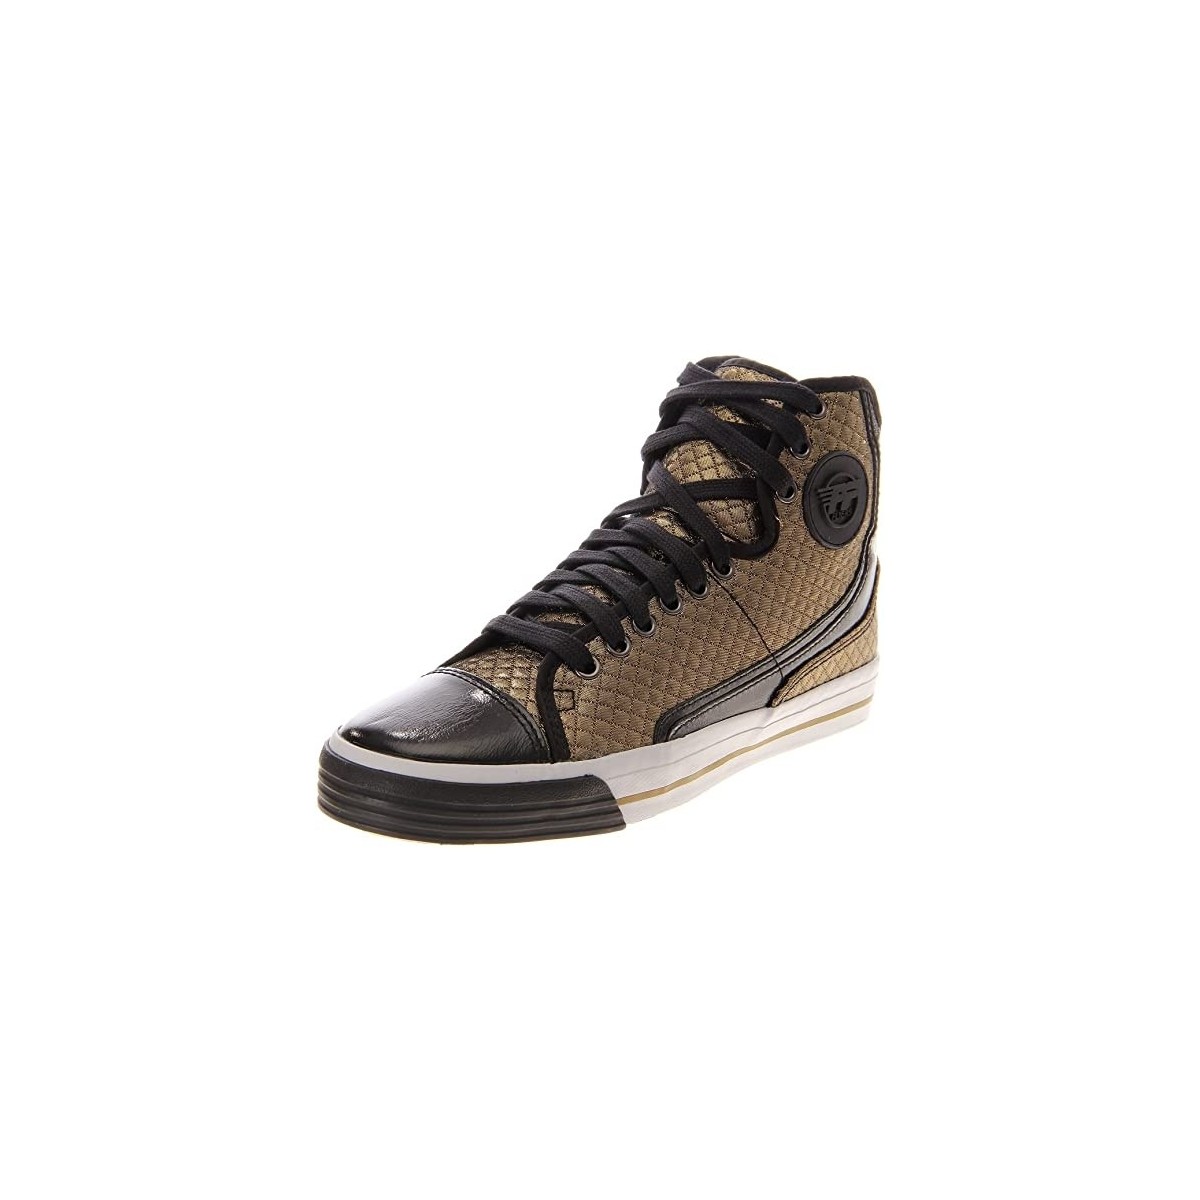 personalidad esfuerzo Antídoto Shoes PF Flyers Glide Gold PM08GD3D